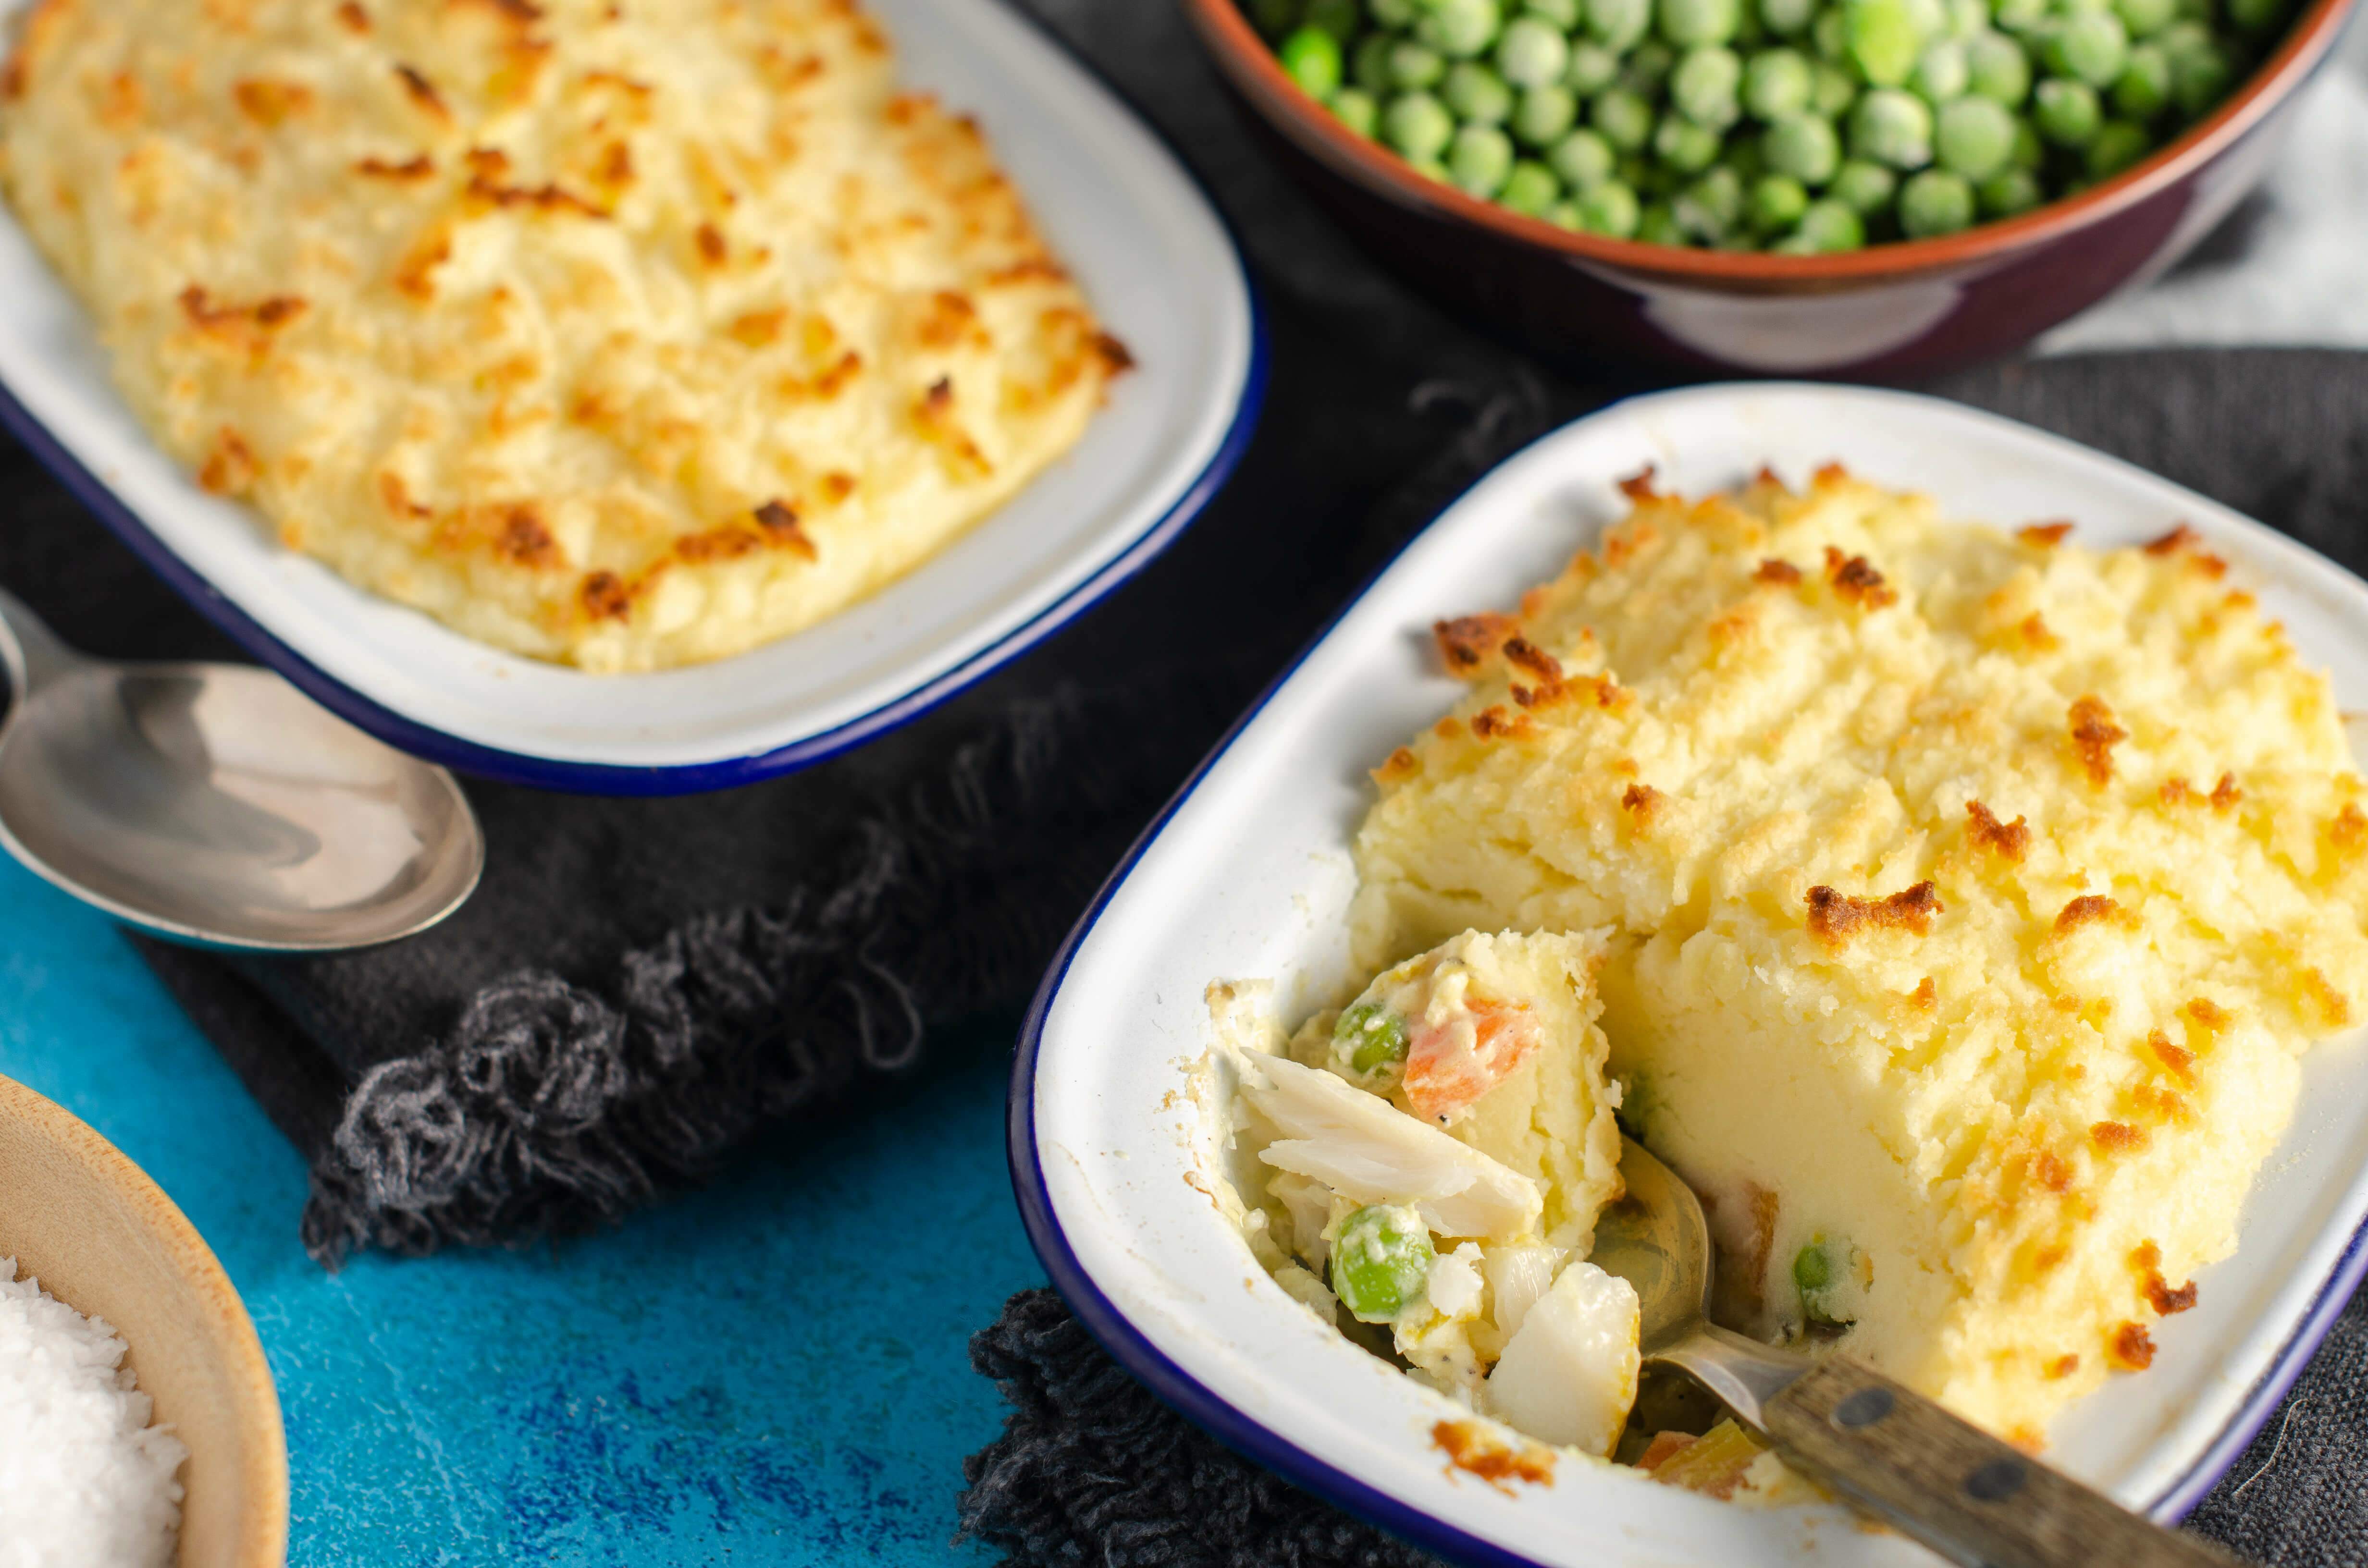 A fish pie dinner for two on a ocean blue background and navy blue napkins